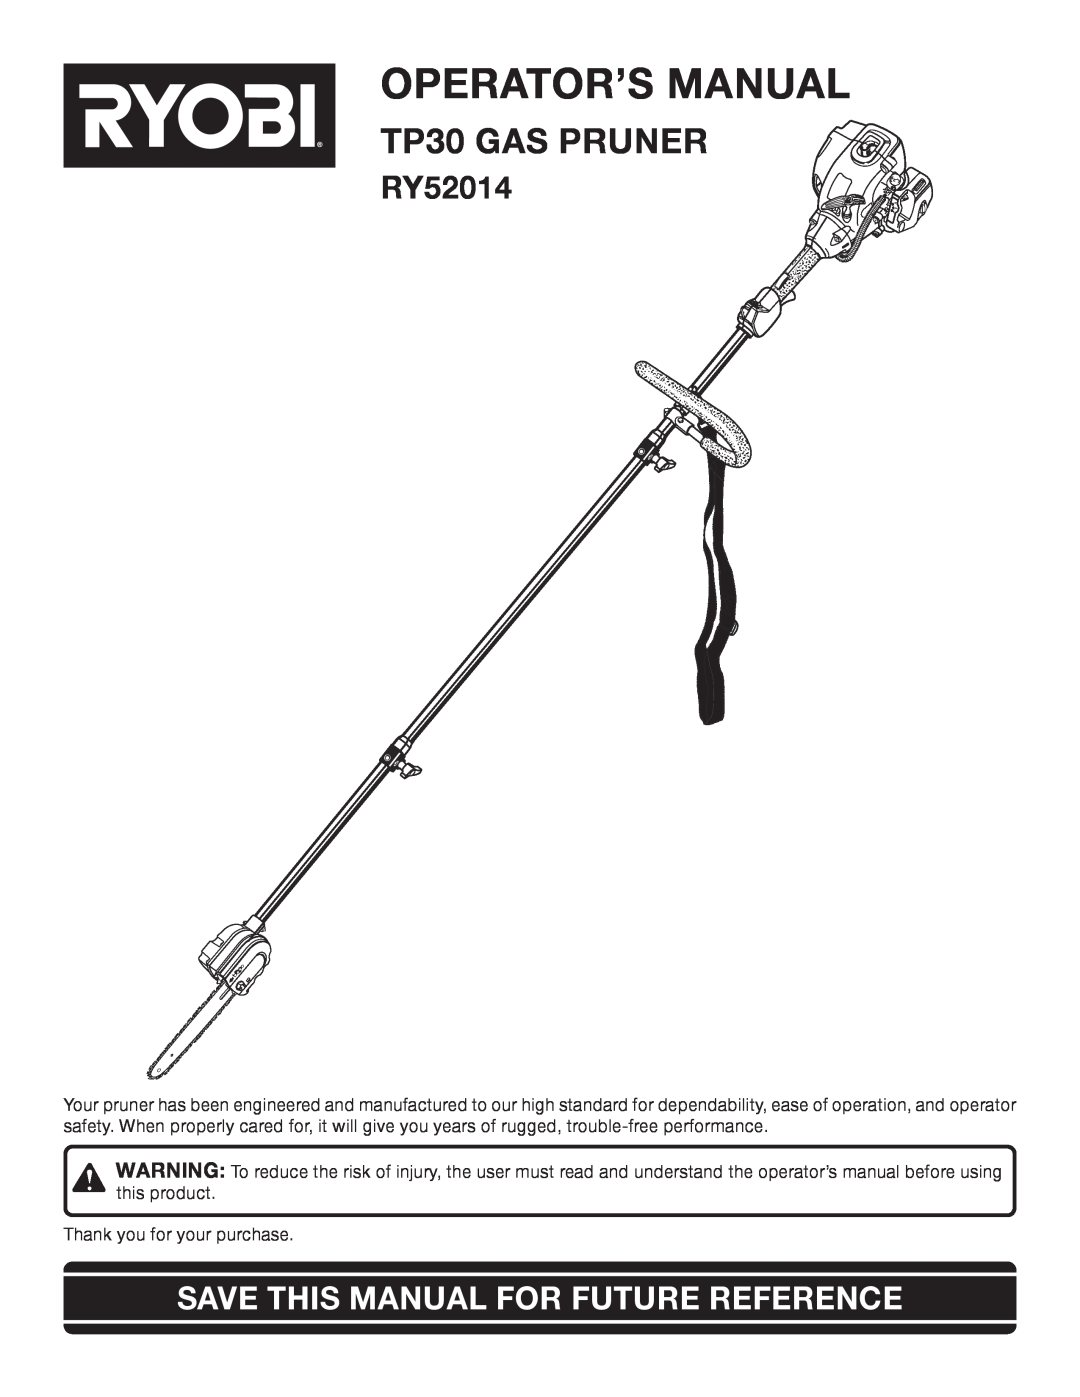 Ryobi RY52014 manual Operator’S Manual, TP30 GAS PRUNER, Save This Manual For Future Reference 